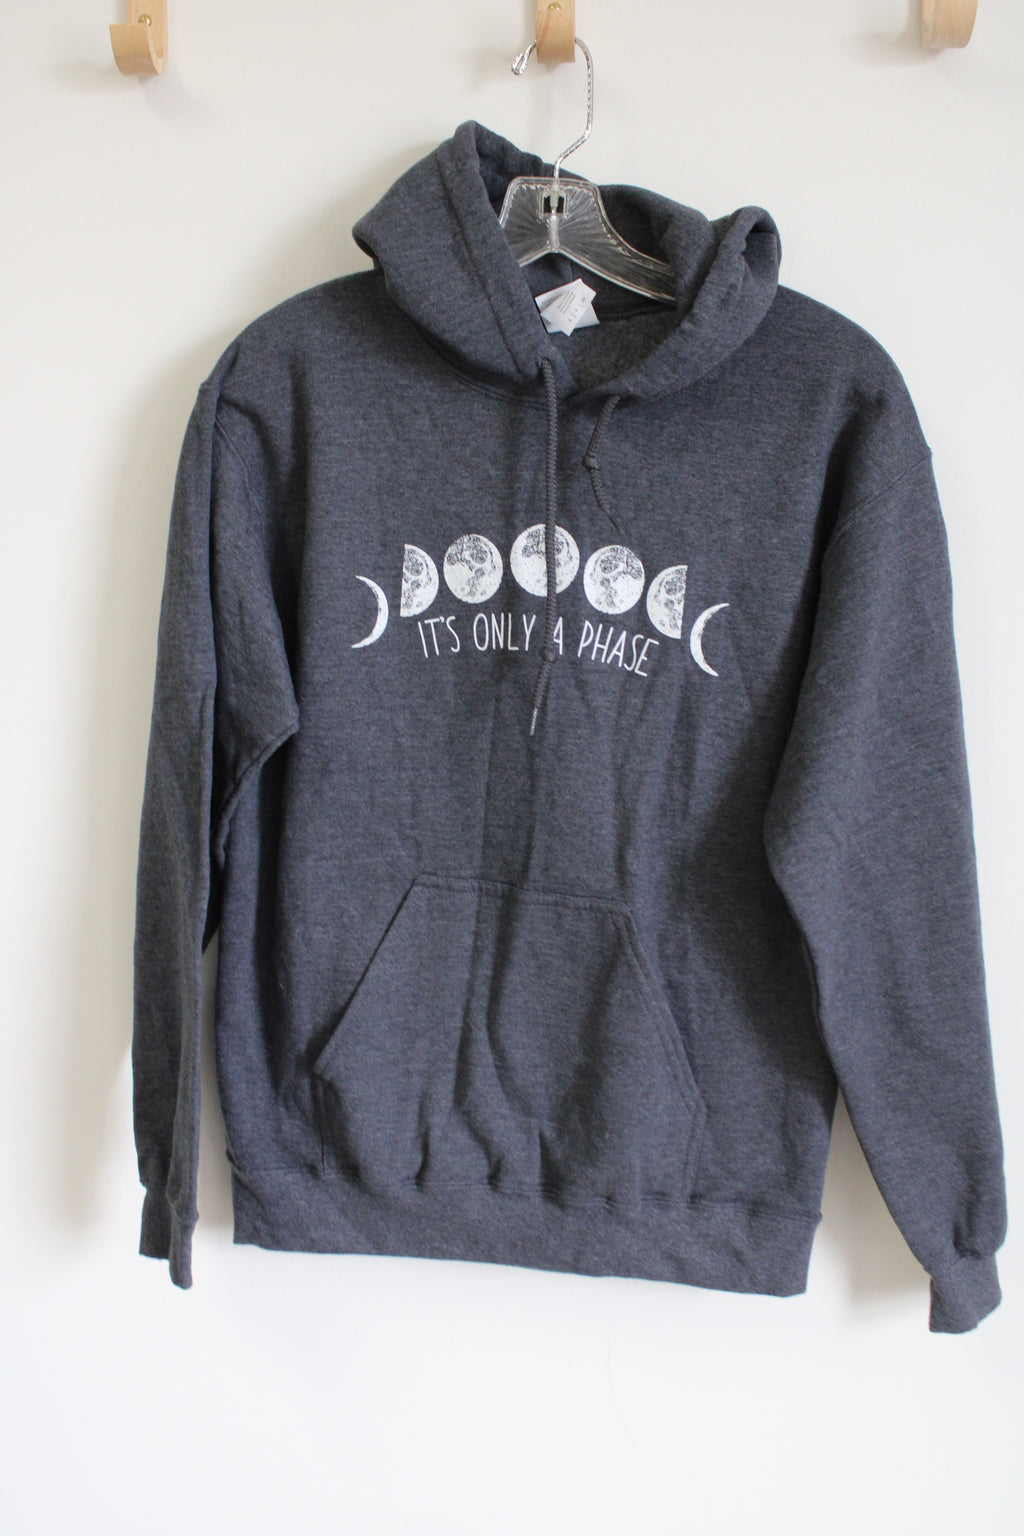 Gildan "It's Only A Phase" Gray Moon Hoodie | S